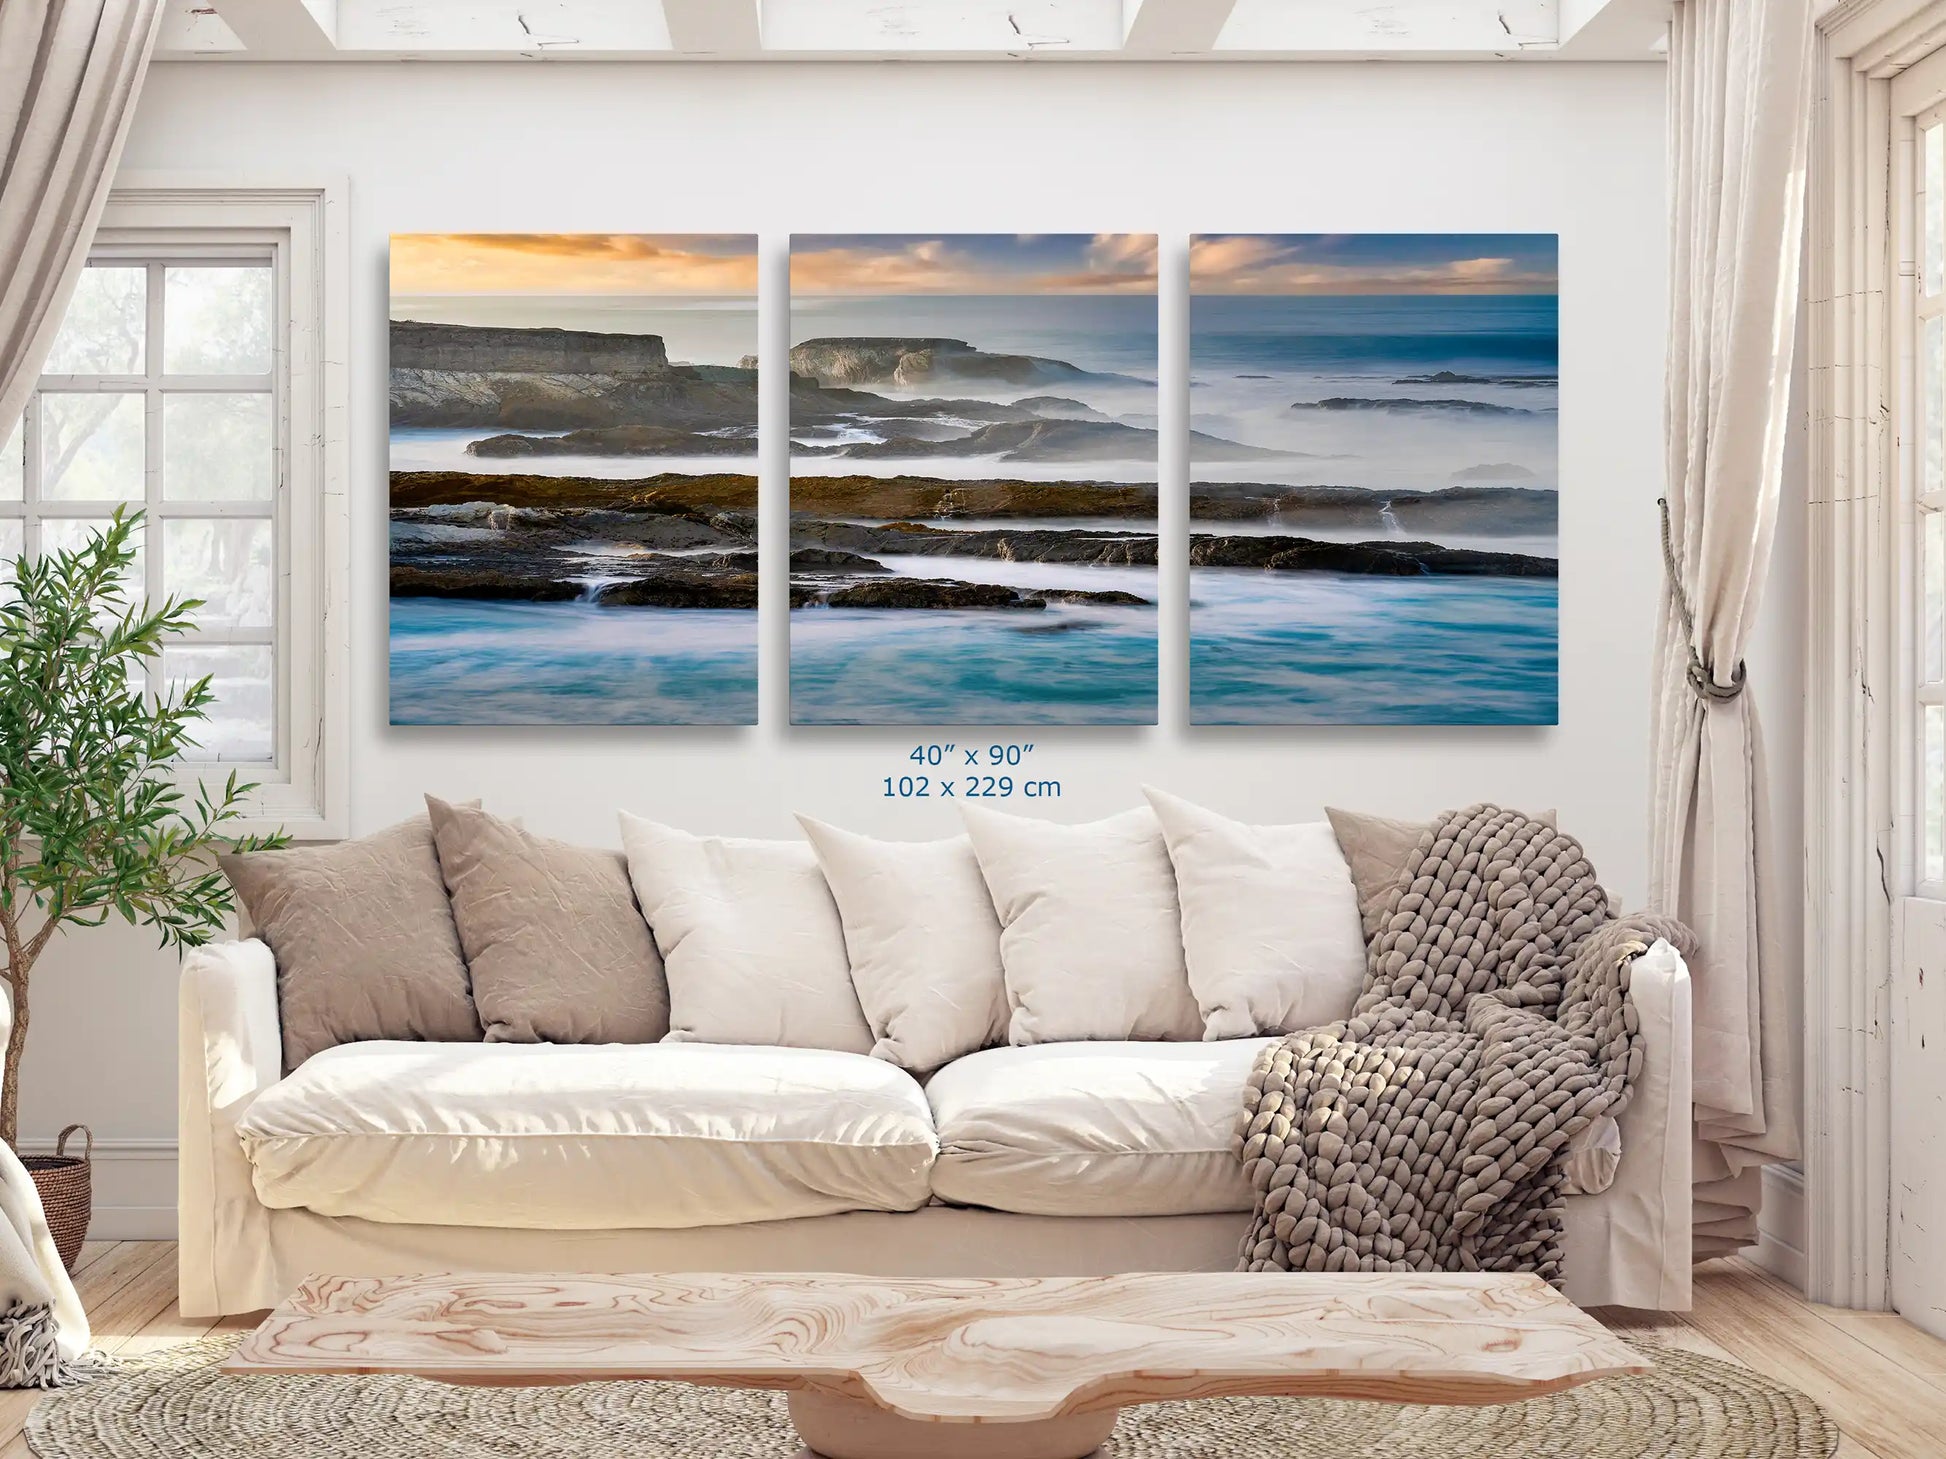 Massive 40x90 inch wall art spanning over a sofa, presenting an immersive view of the California Pacific cliffs and waves, making a grand statement.